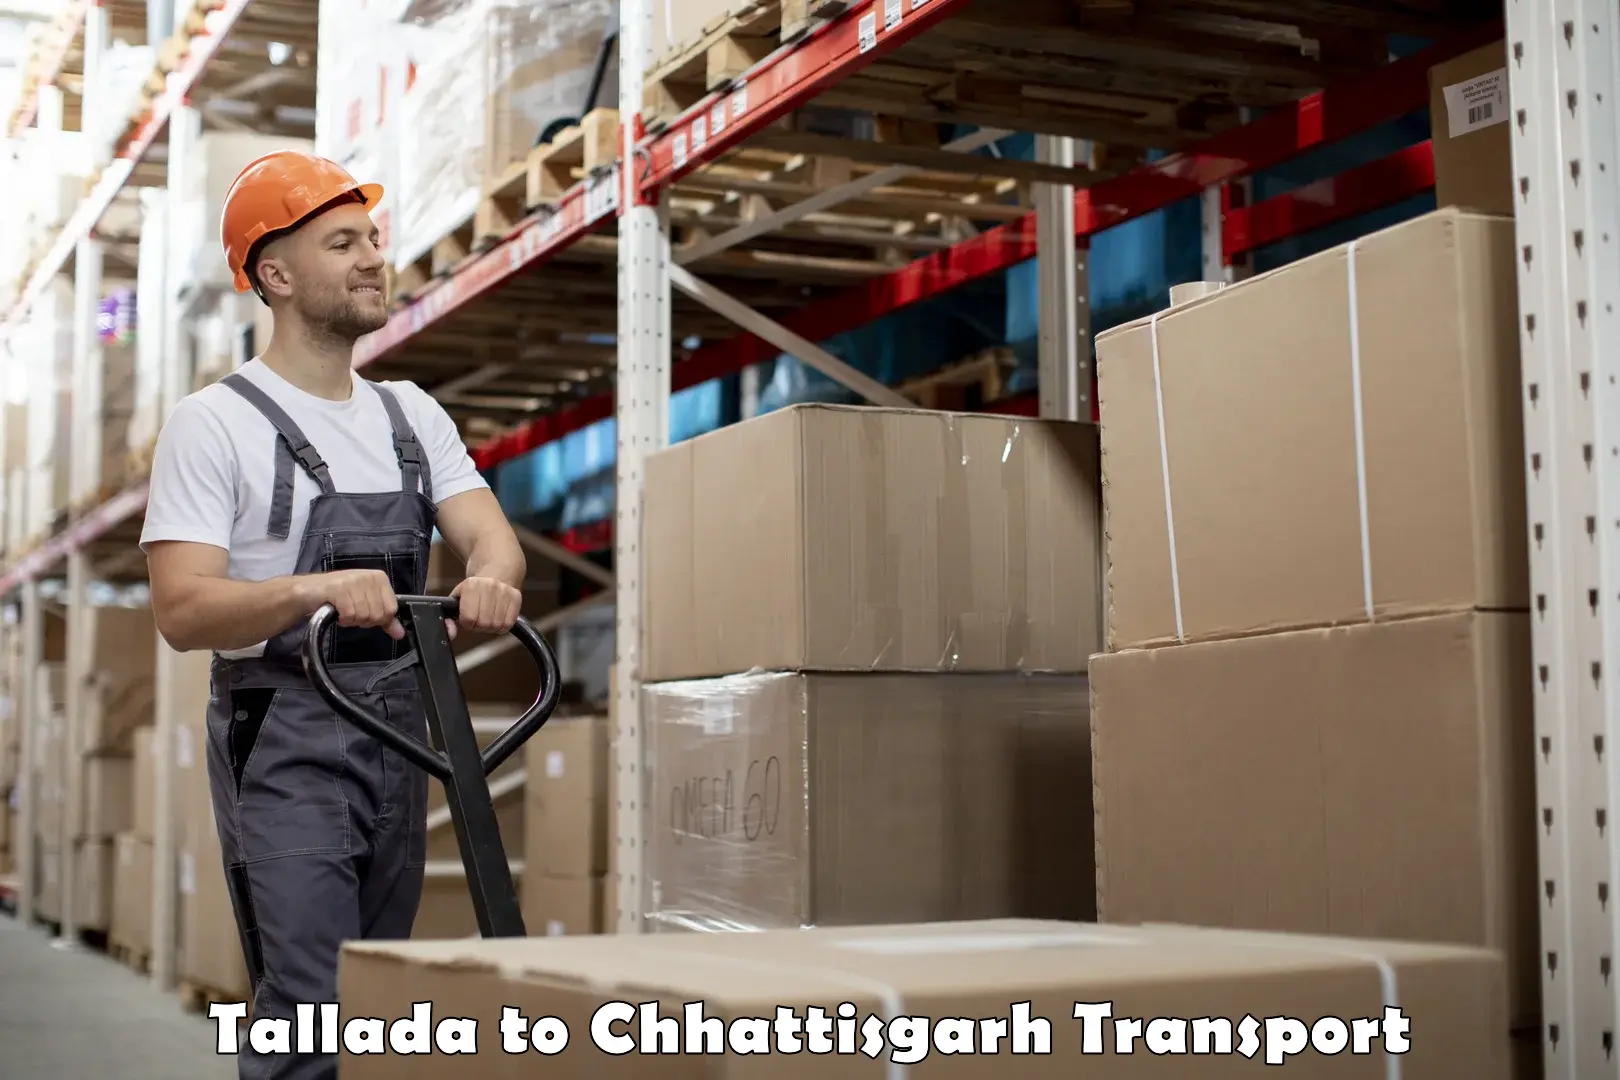 Truck transport companies in India Tallada to bagbahra